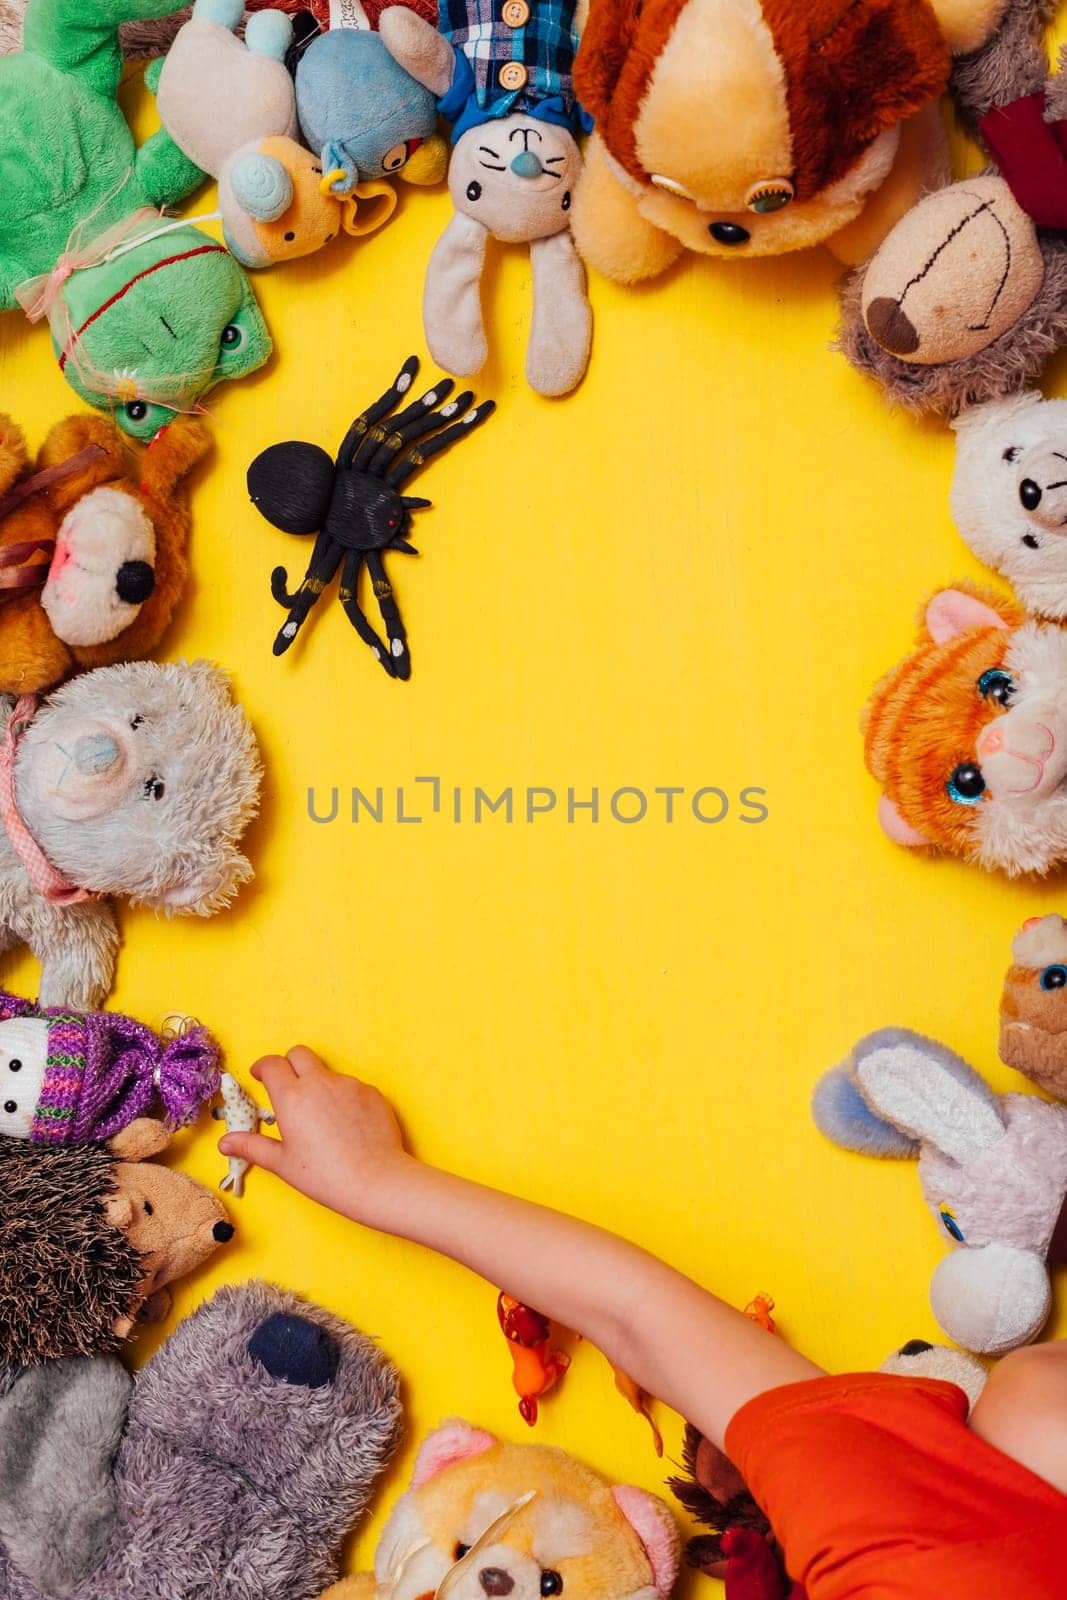 lots of children's soft toy animals for developing games as a background